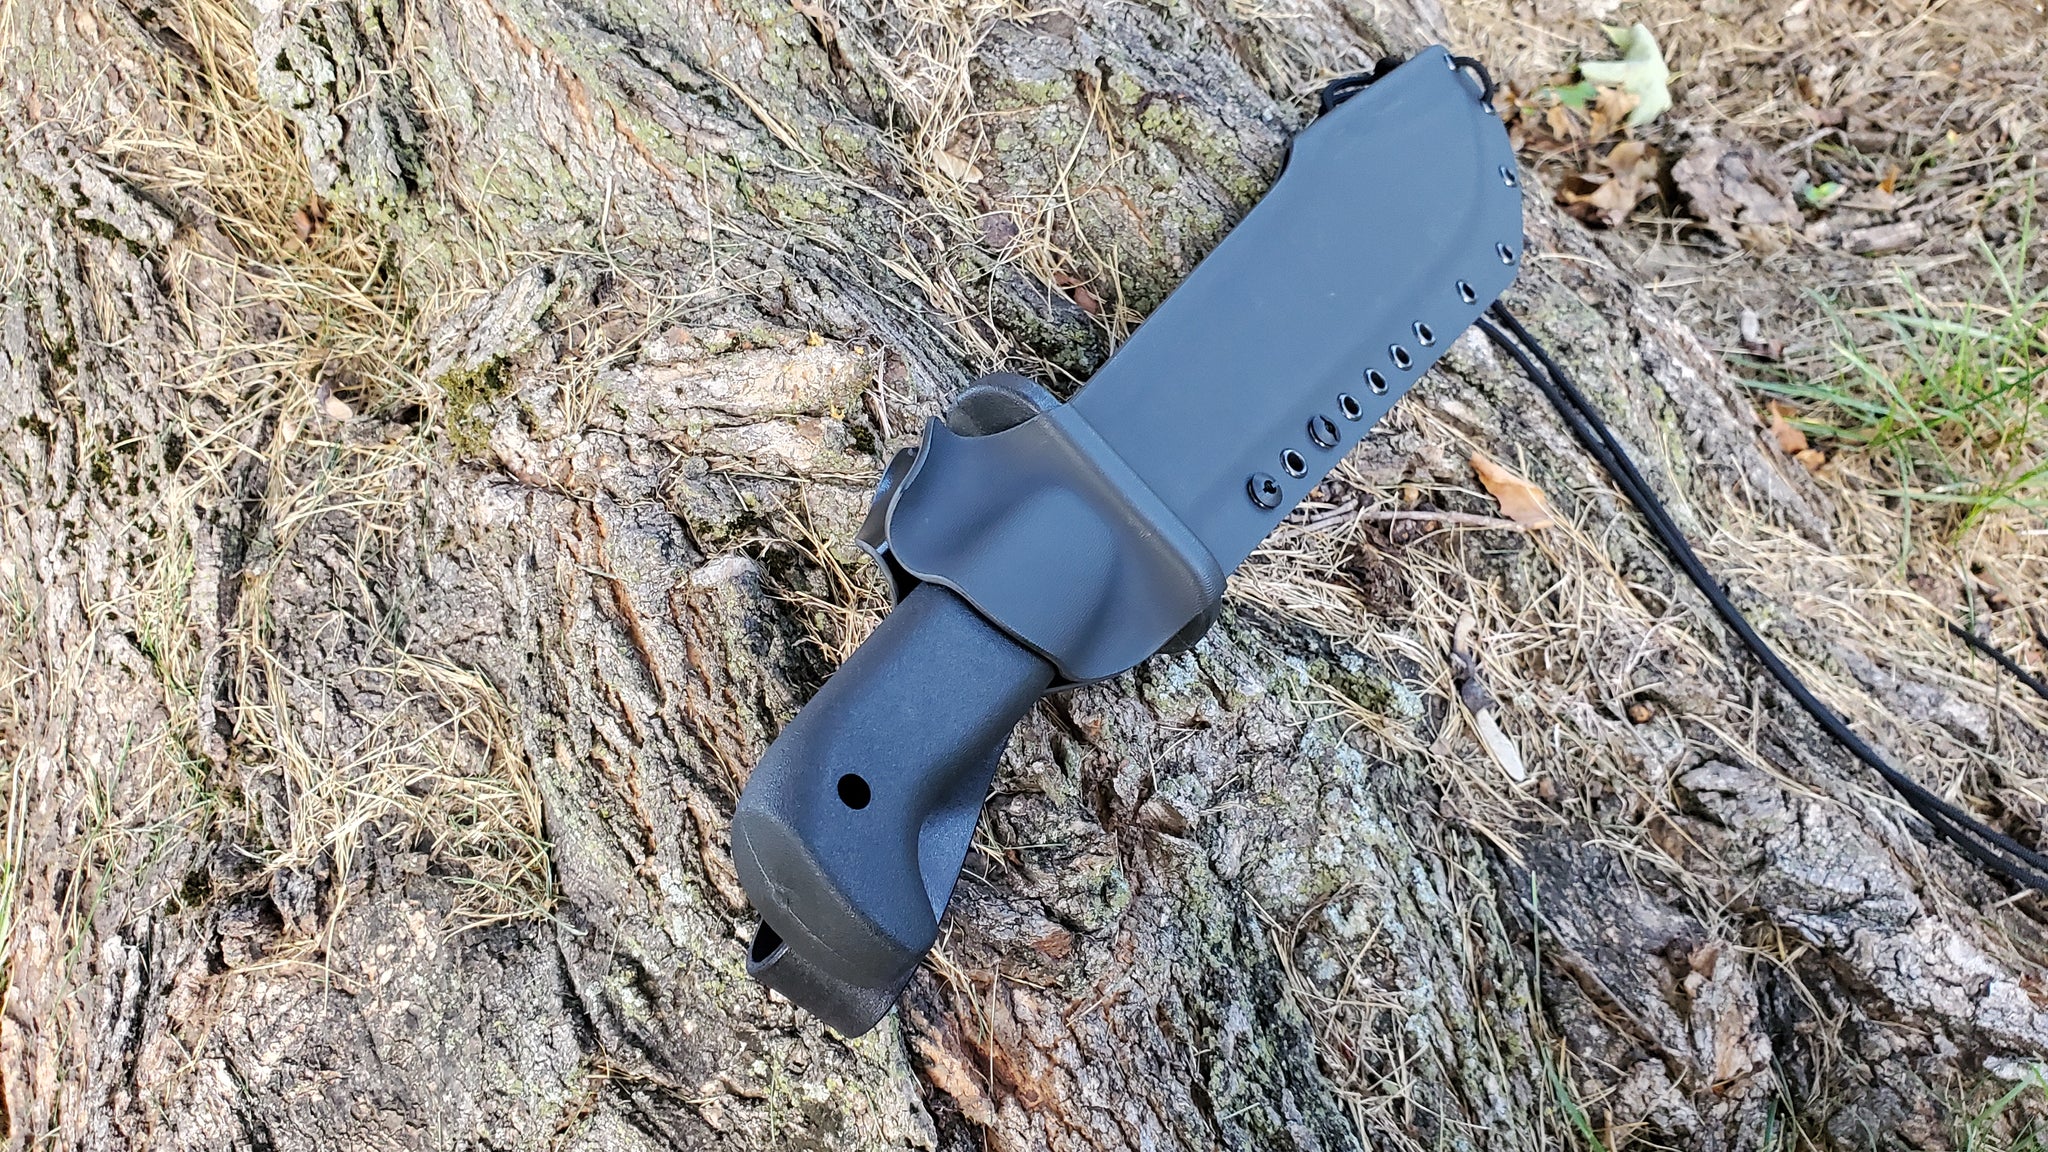 COLD STEEL "BLACK BEAR BOWIE" Kydex Taco Sheath with Dangler